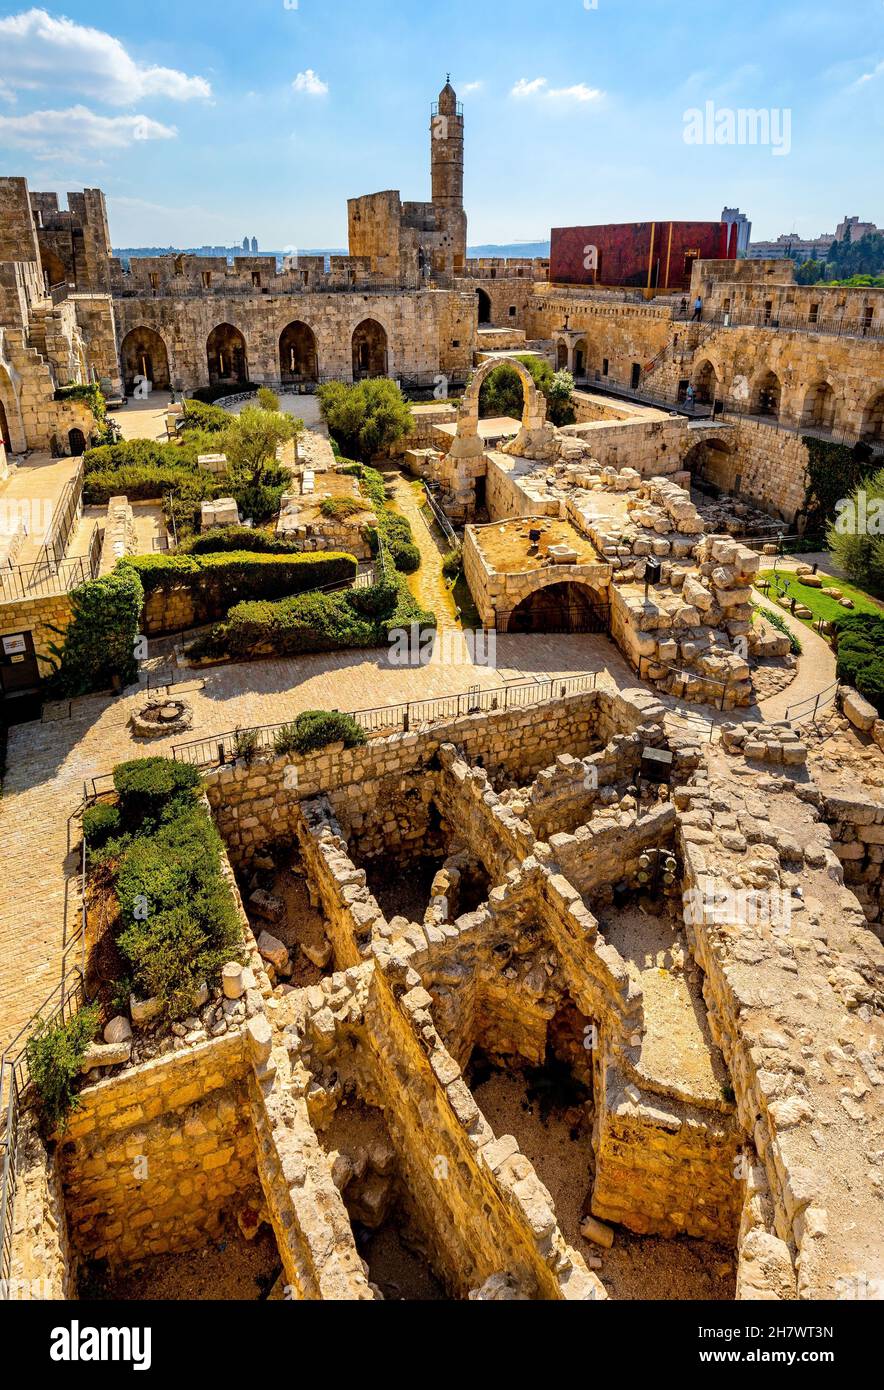 Jerusalem, Israel - October 12, 2017: Inner courtyard, walls and archeological excavation site of Tower Of David citadel complex in Jerusalem Old City Stock Photo